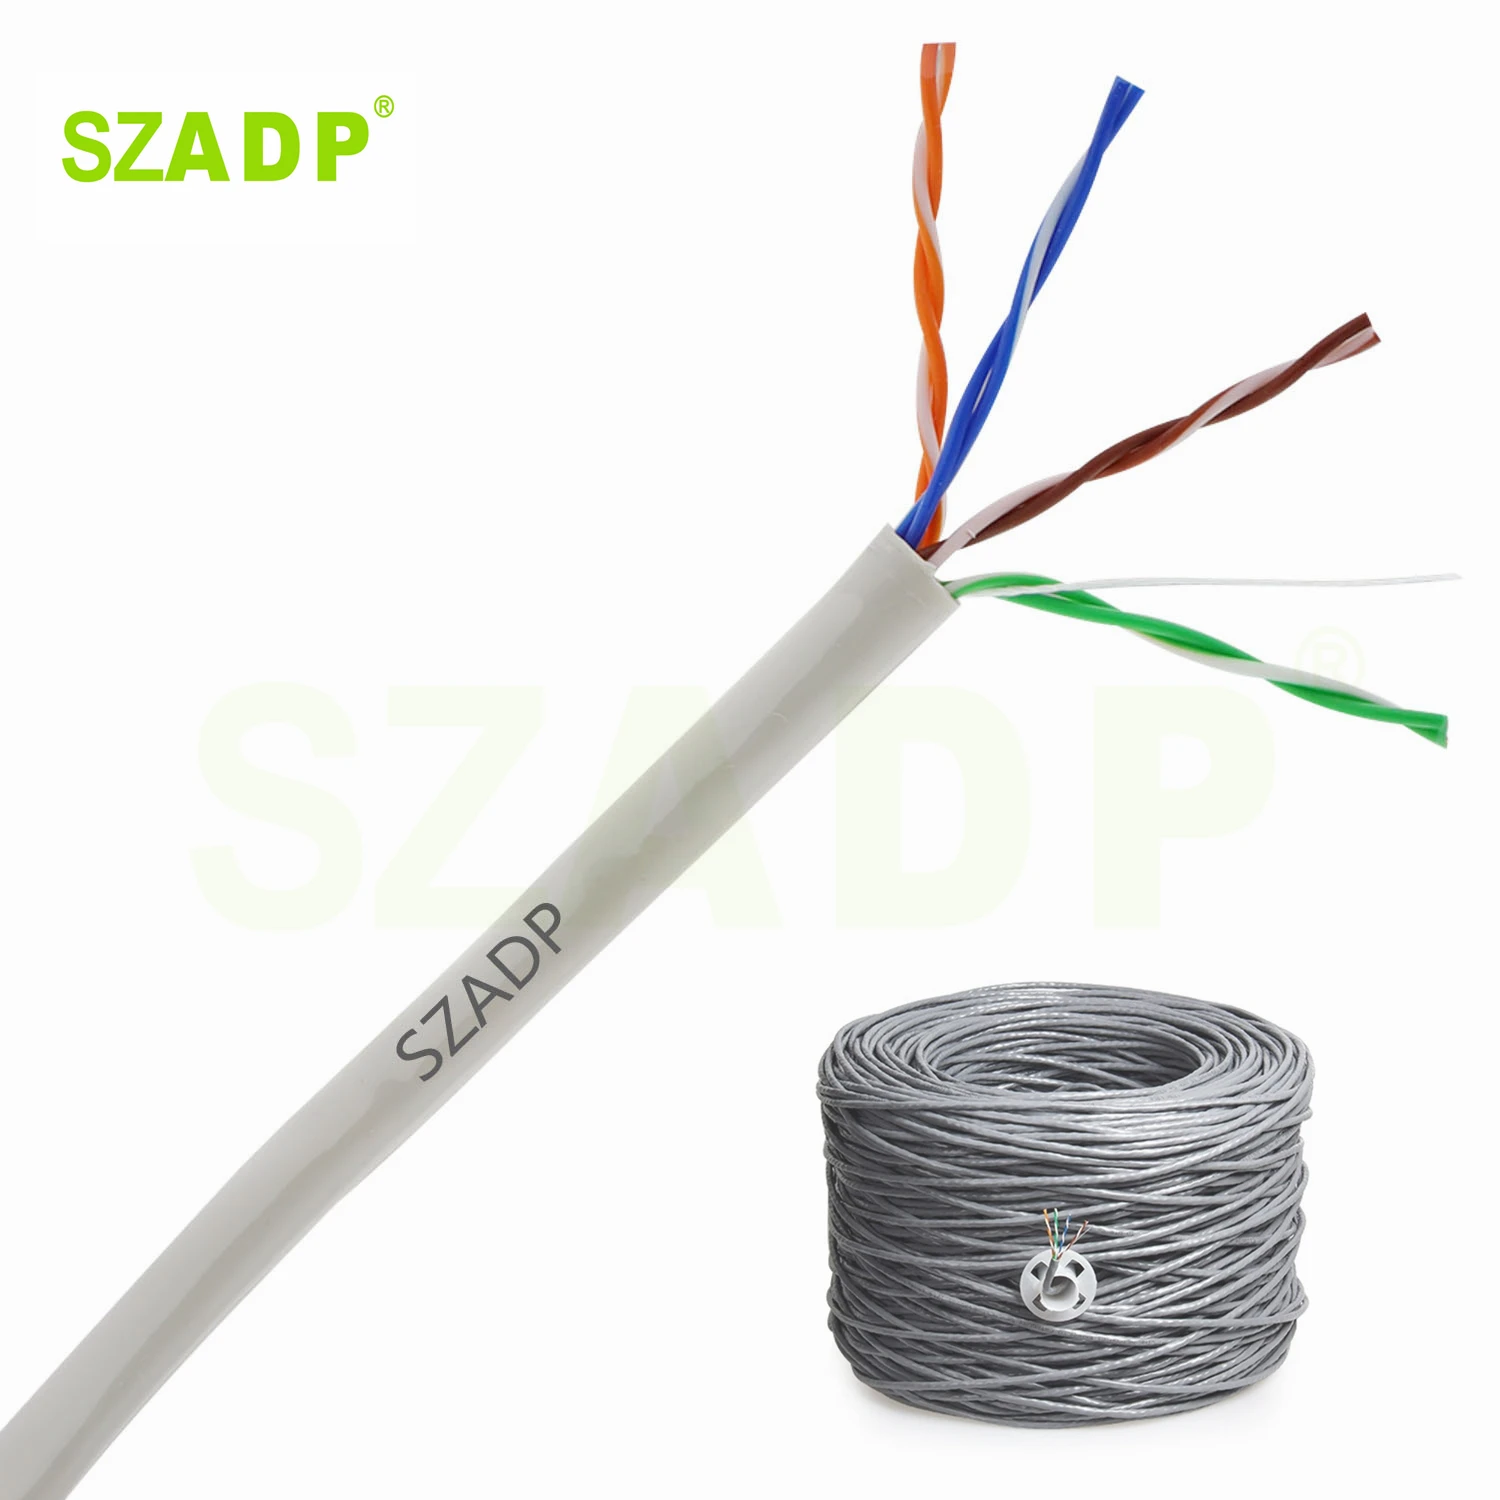 SZADP Lan Cable Cat5 Copper CCA 4Pair 24AWG 0.5mm Network Cable Cat5E UTP